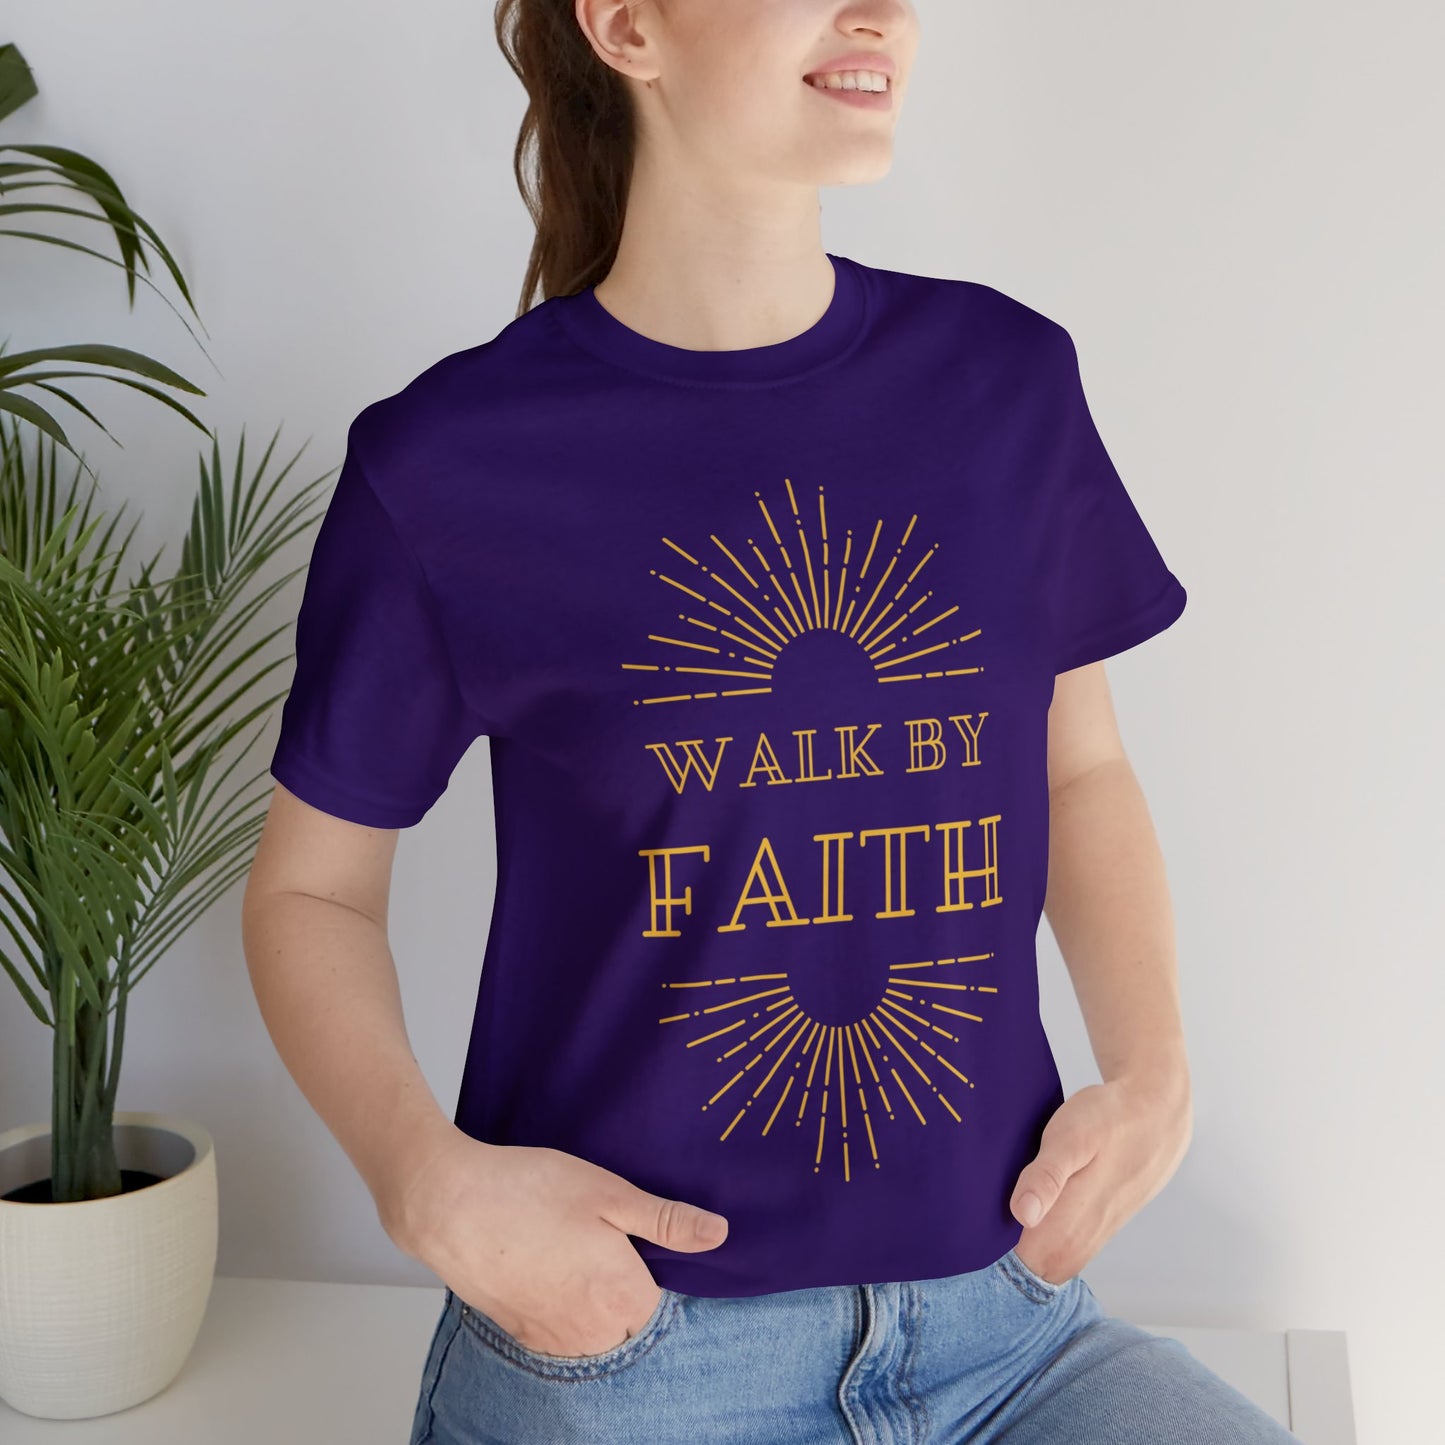 Walk By Faith Not By Sight T-Shirt - Front & Back Christian Tee Bright Colors